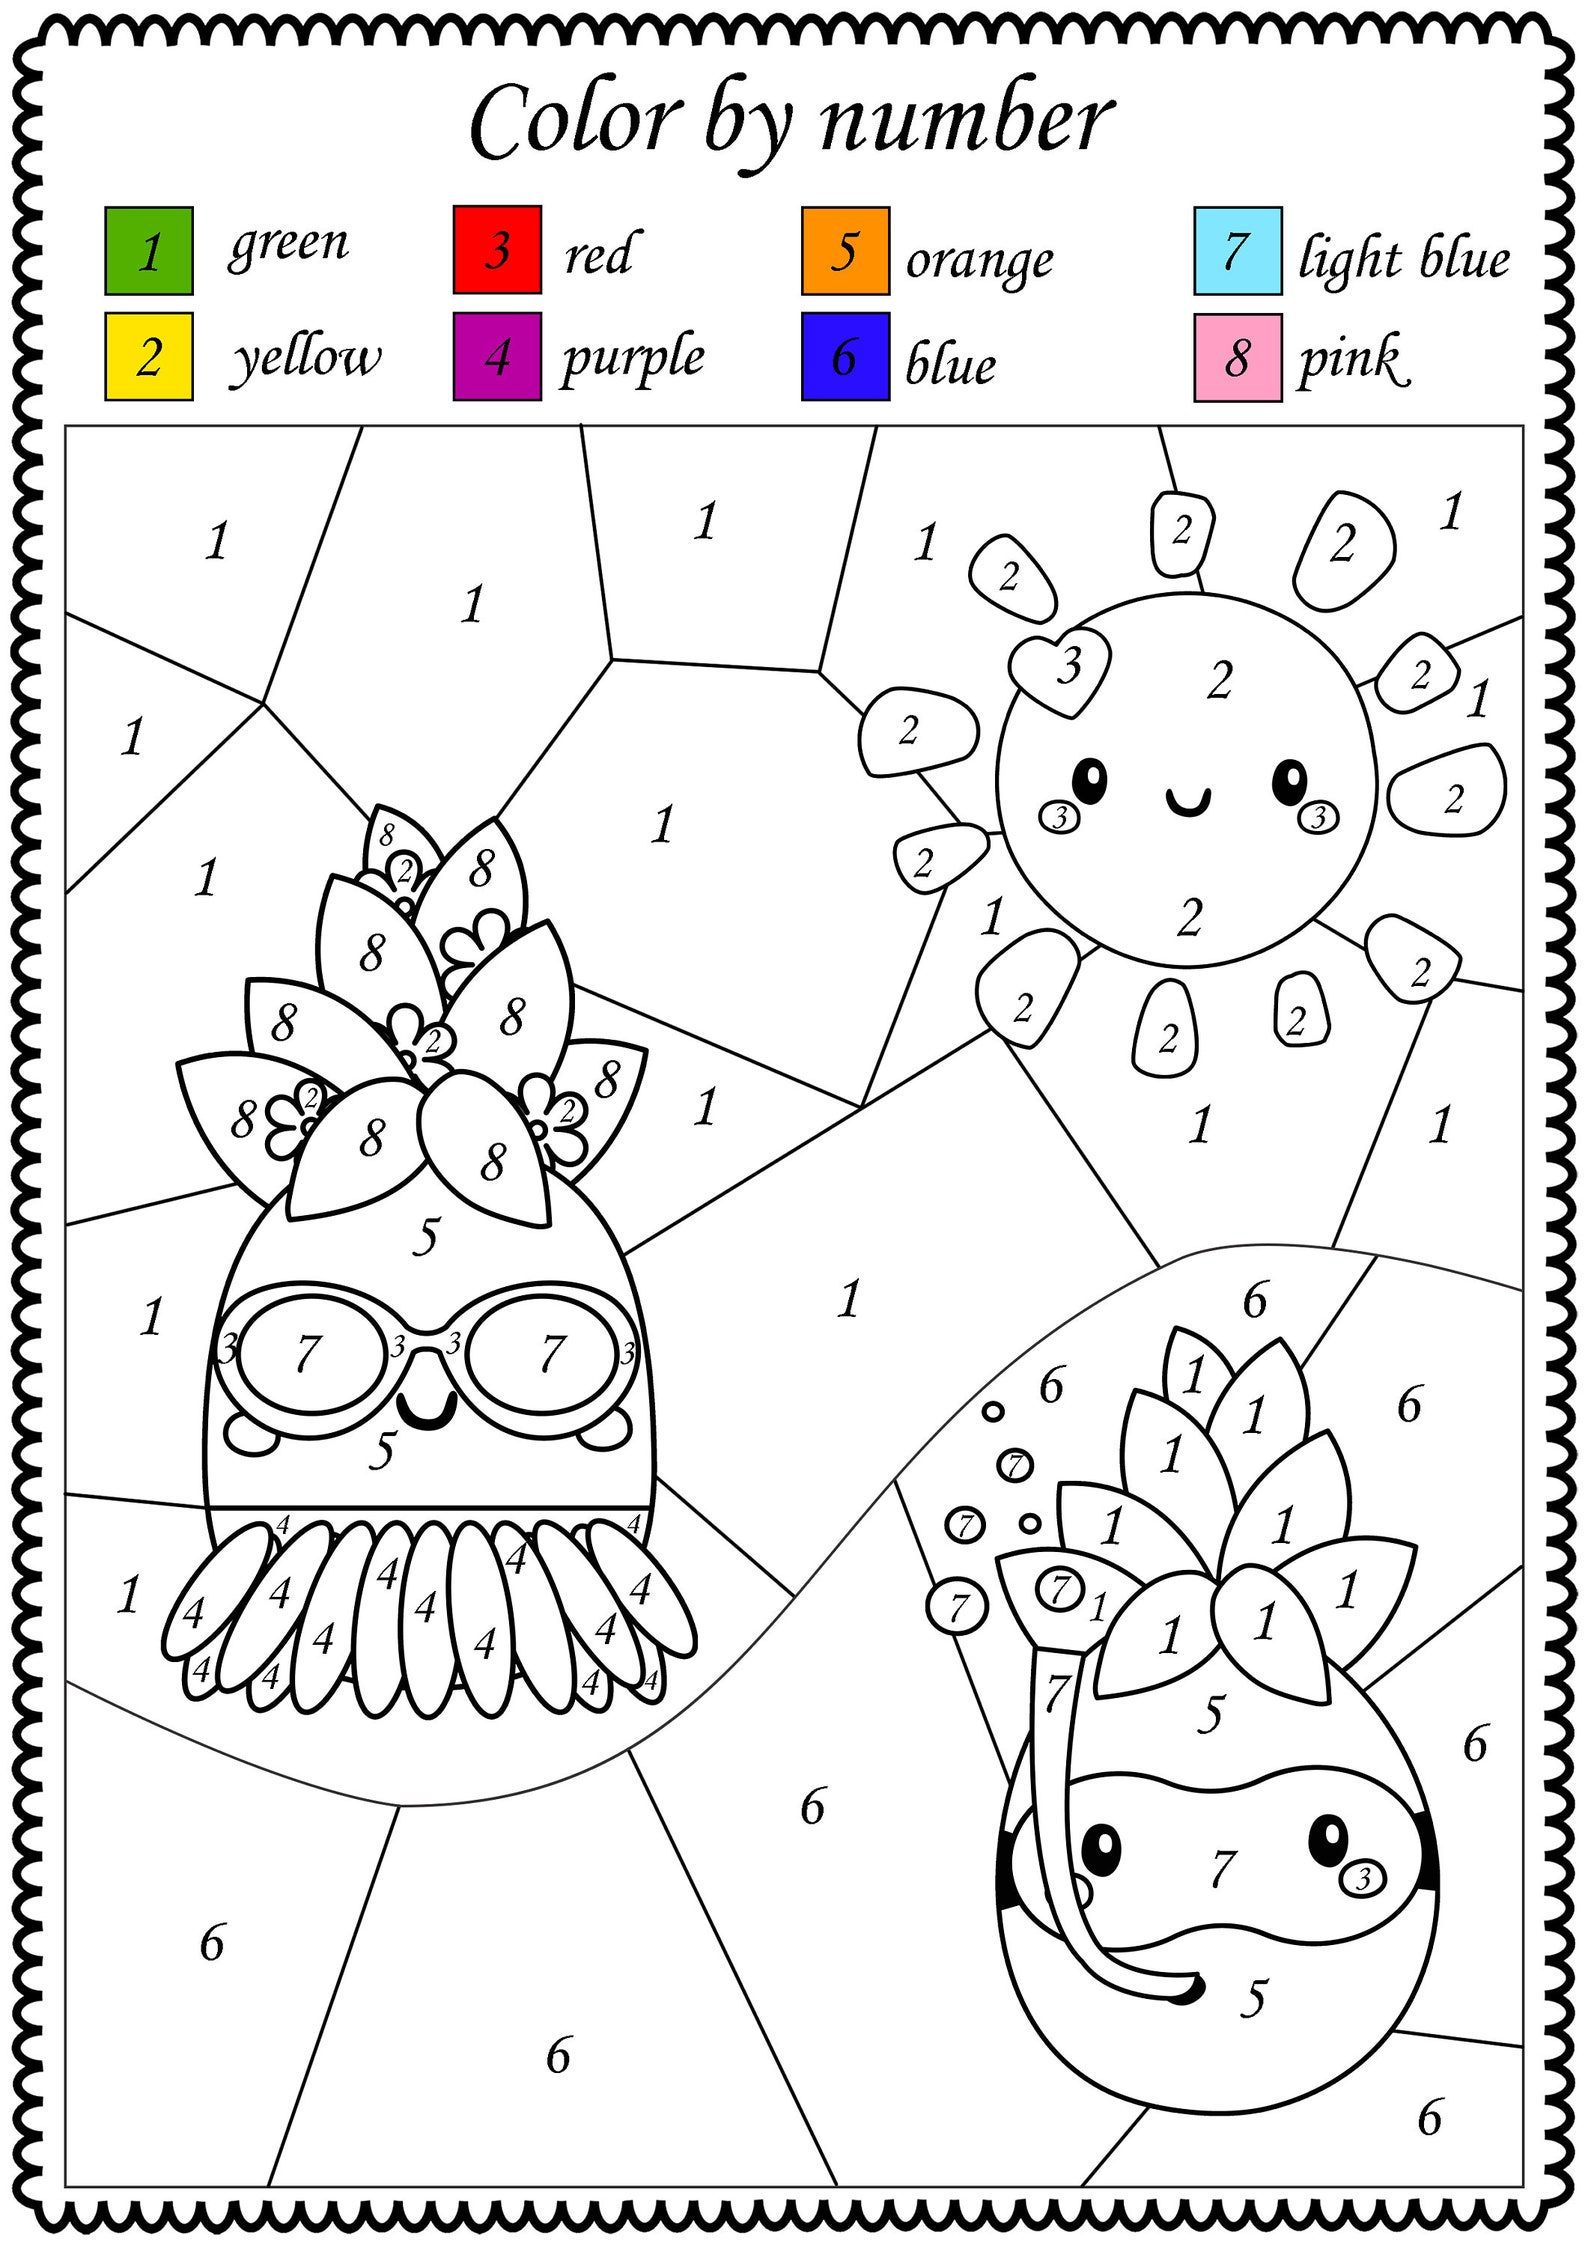 color-by-number-summer-printable-math-color-by-code-worksheets-for